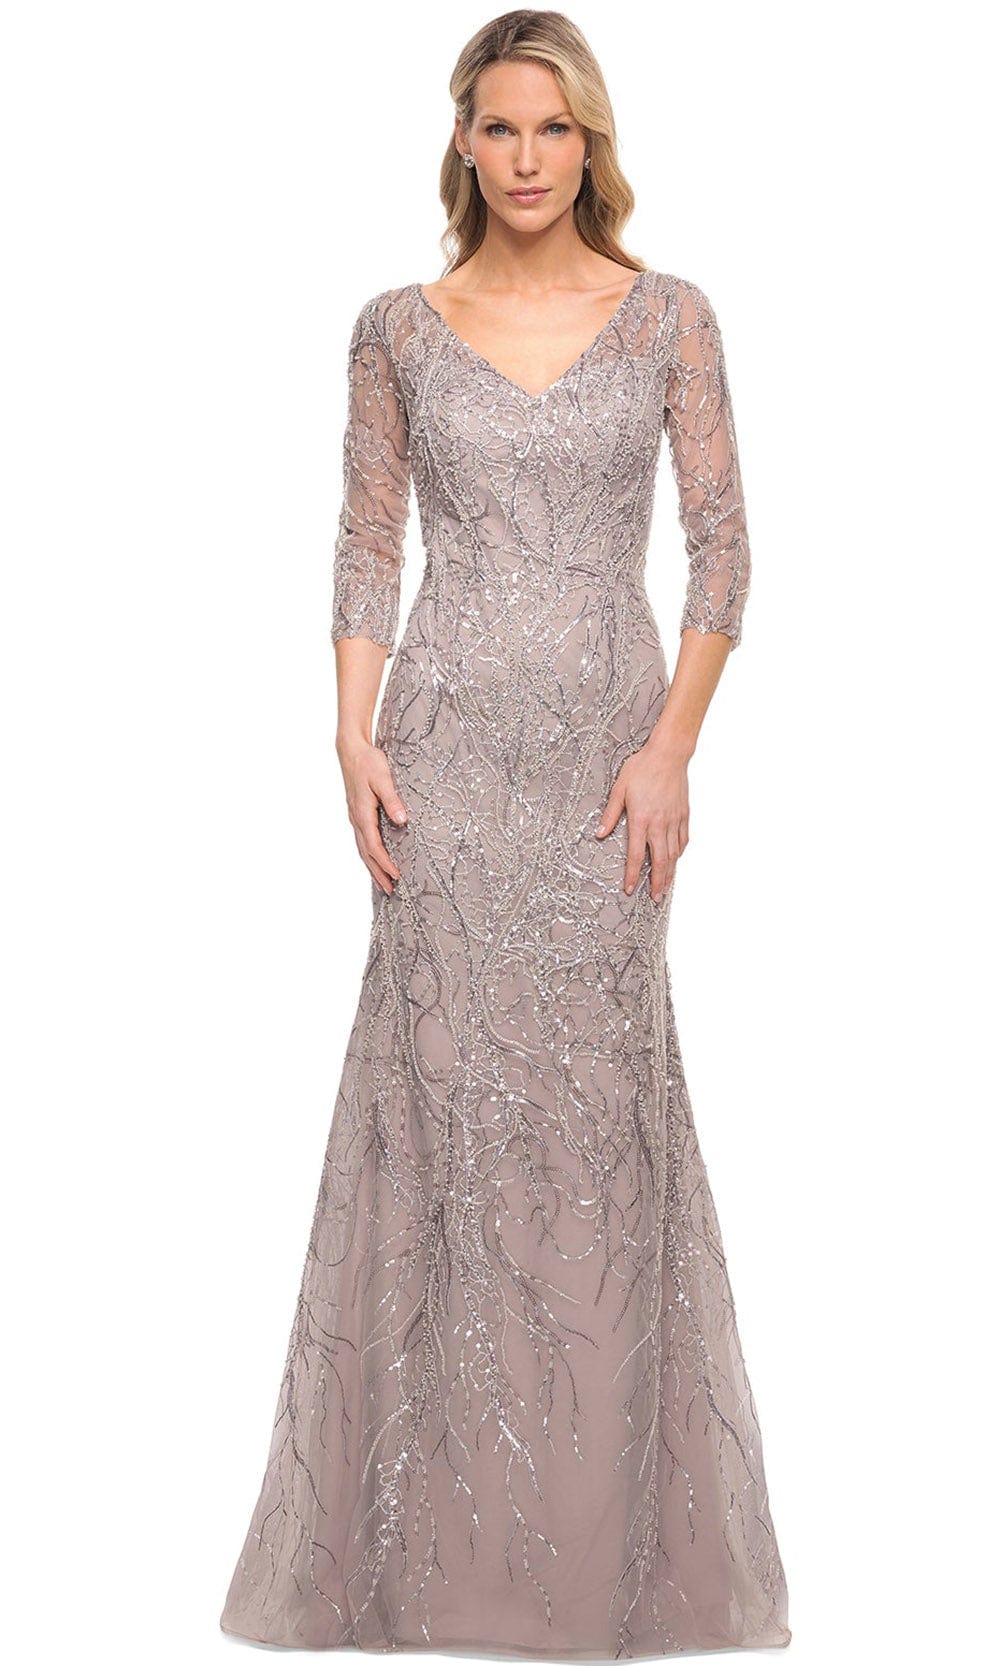 Image of La Femme 30044 - Embroidered Mermaid Mother of the Groom Dress